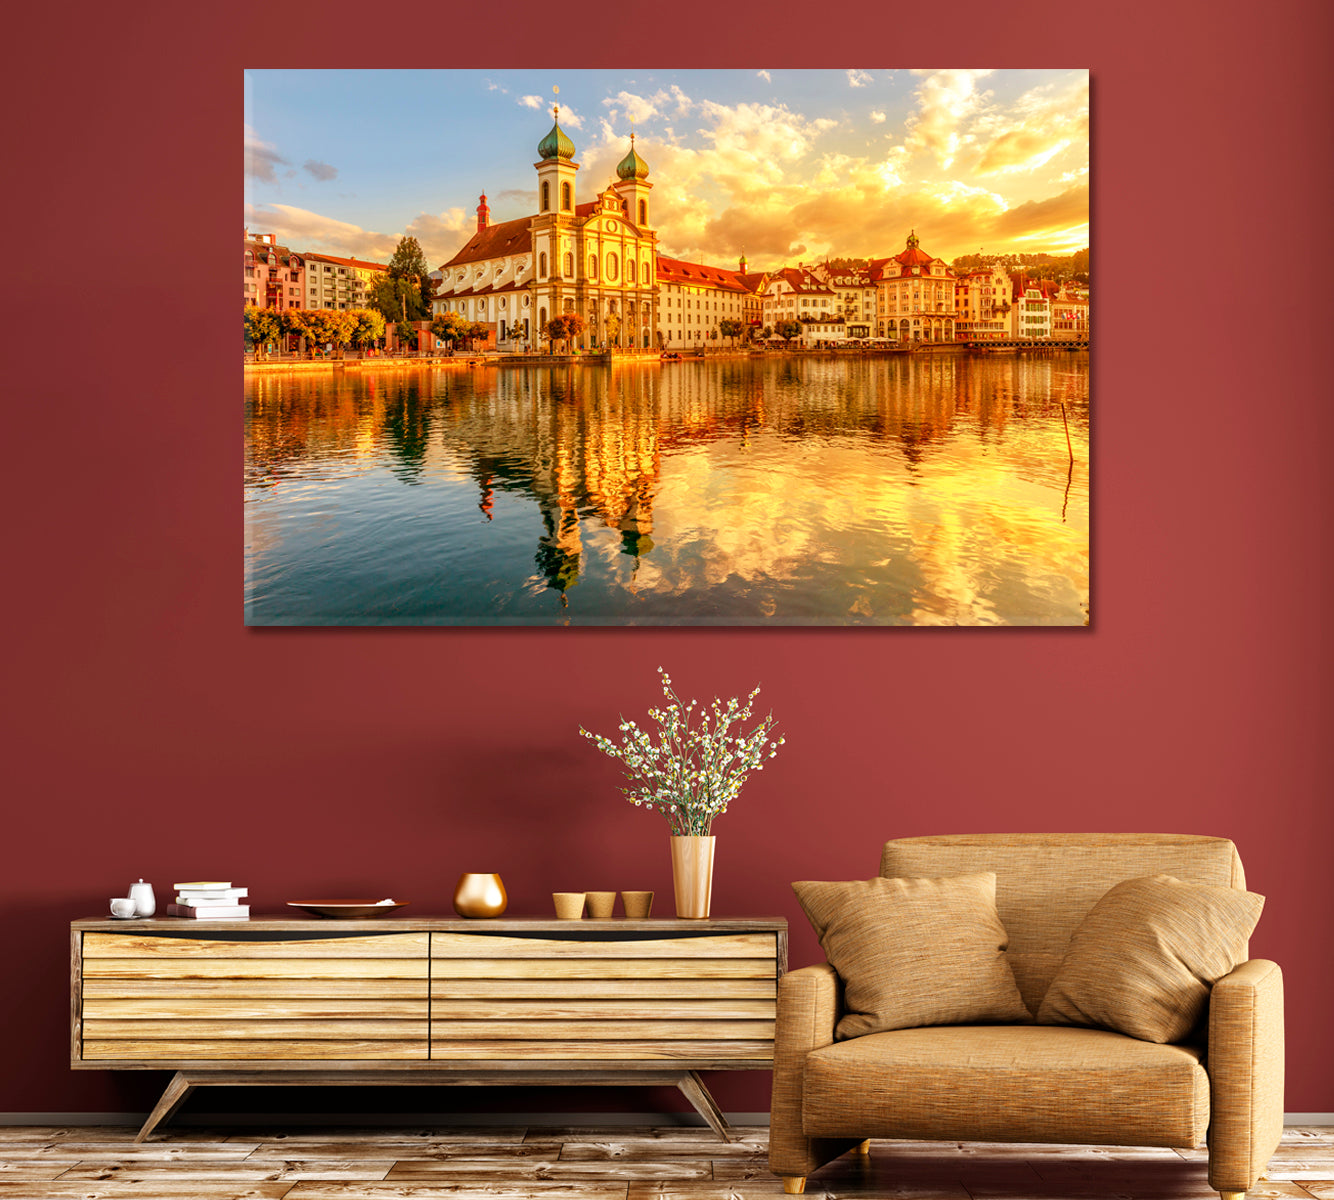 Sunset over the Cathedral of St Francis Xavier Switzerland Canvas Print-Canvas Print-CetArt-1 Panel-24x16 inches-CetArt